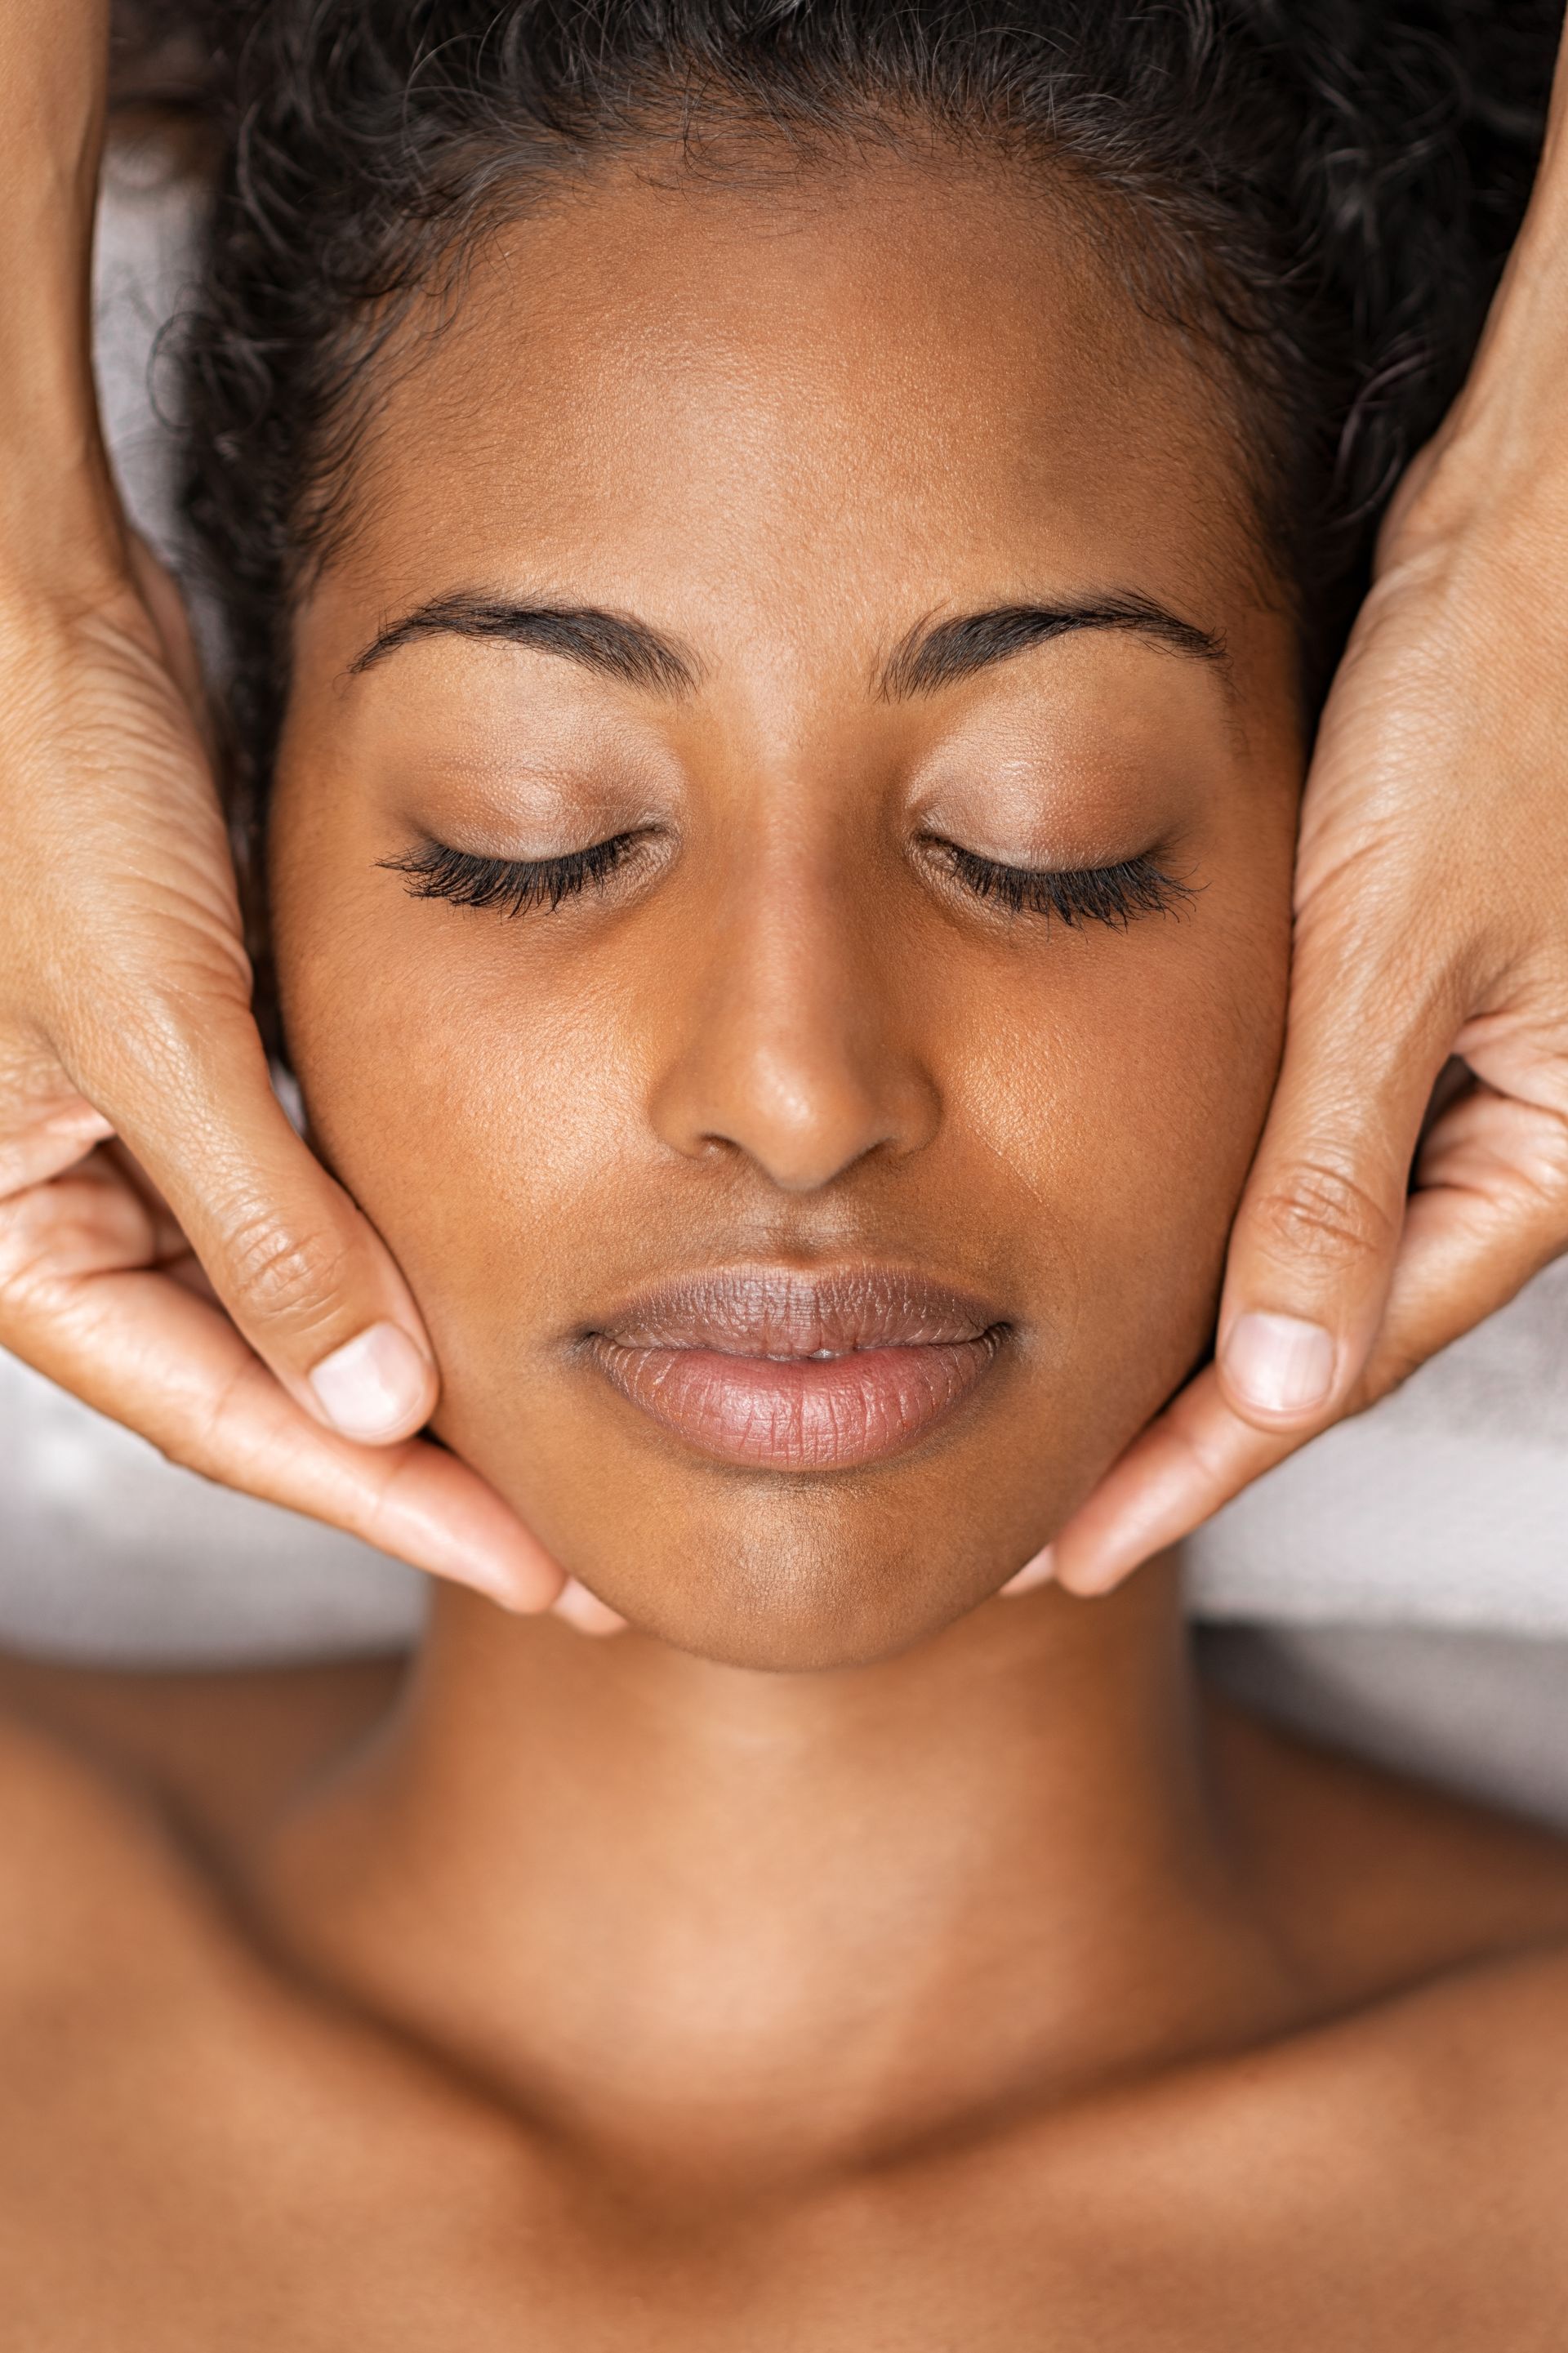 A woman is getting a facial massage at a spa.